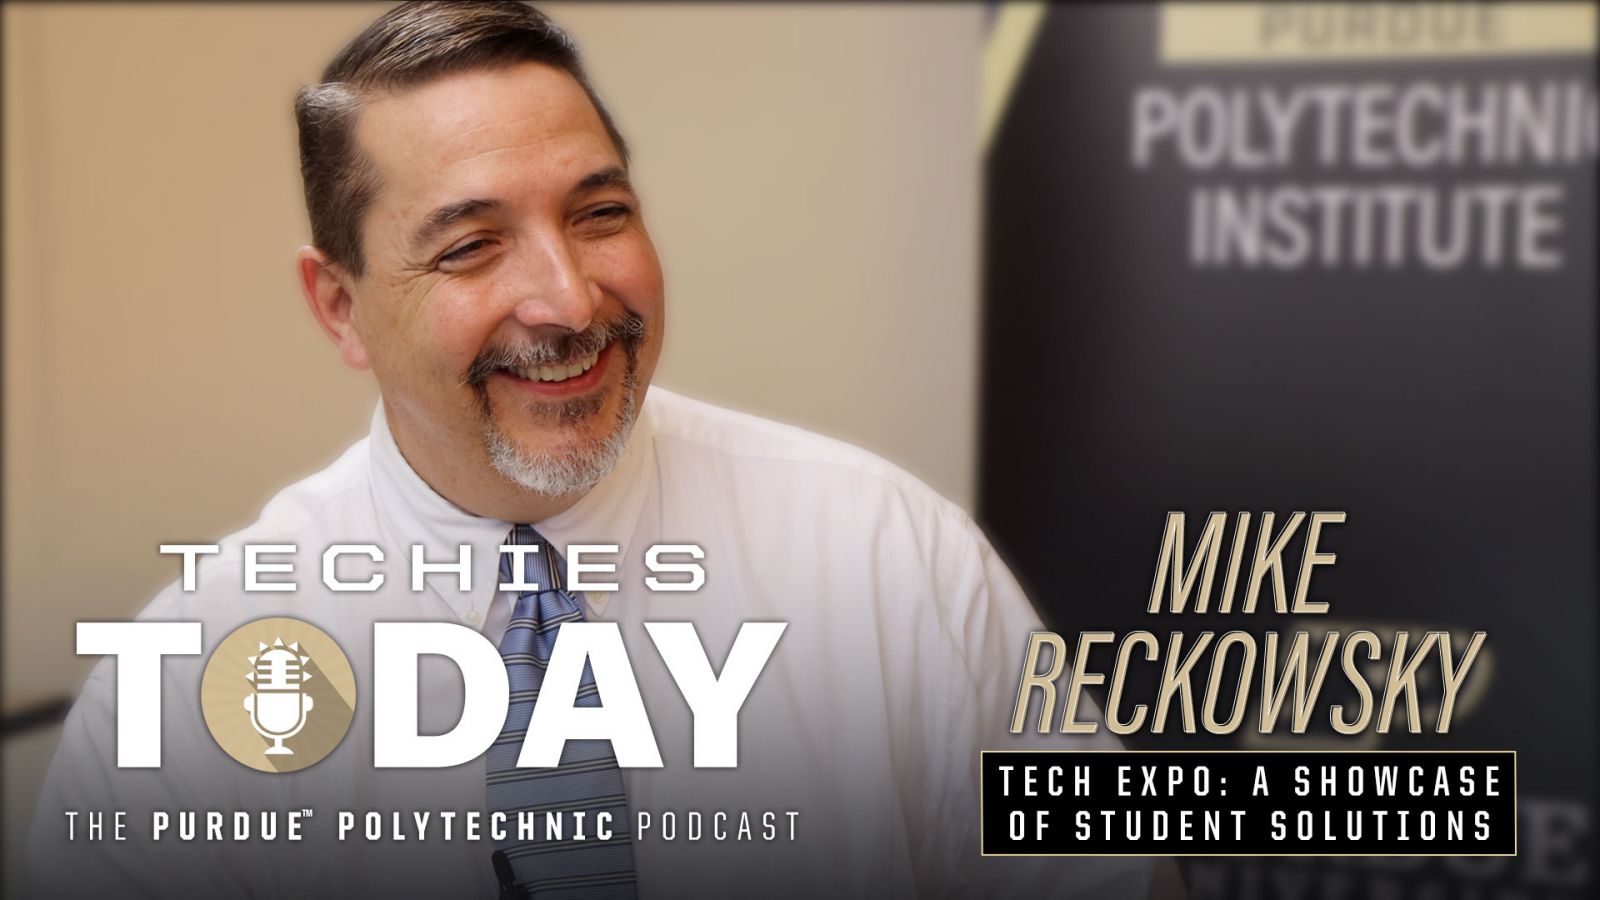 Techies Today Episode 017: Mike Reckowsky & Tech Expo, a Showcase of Student Solutions